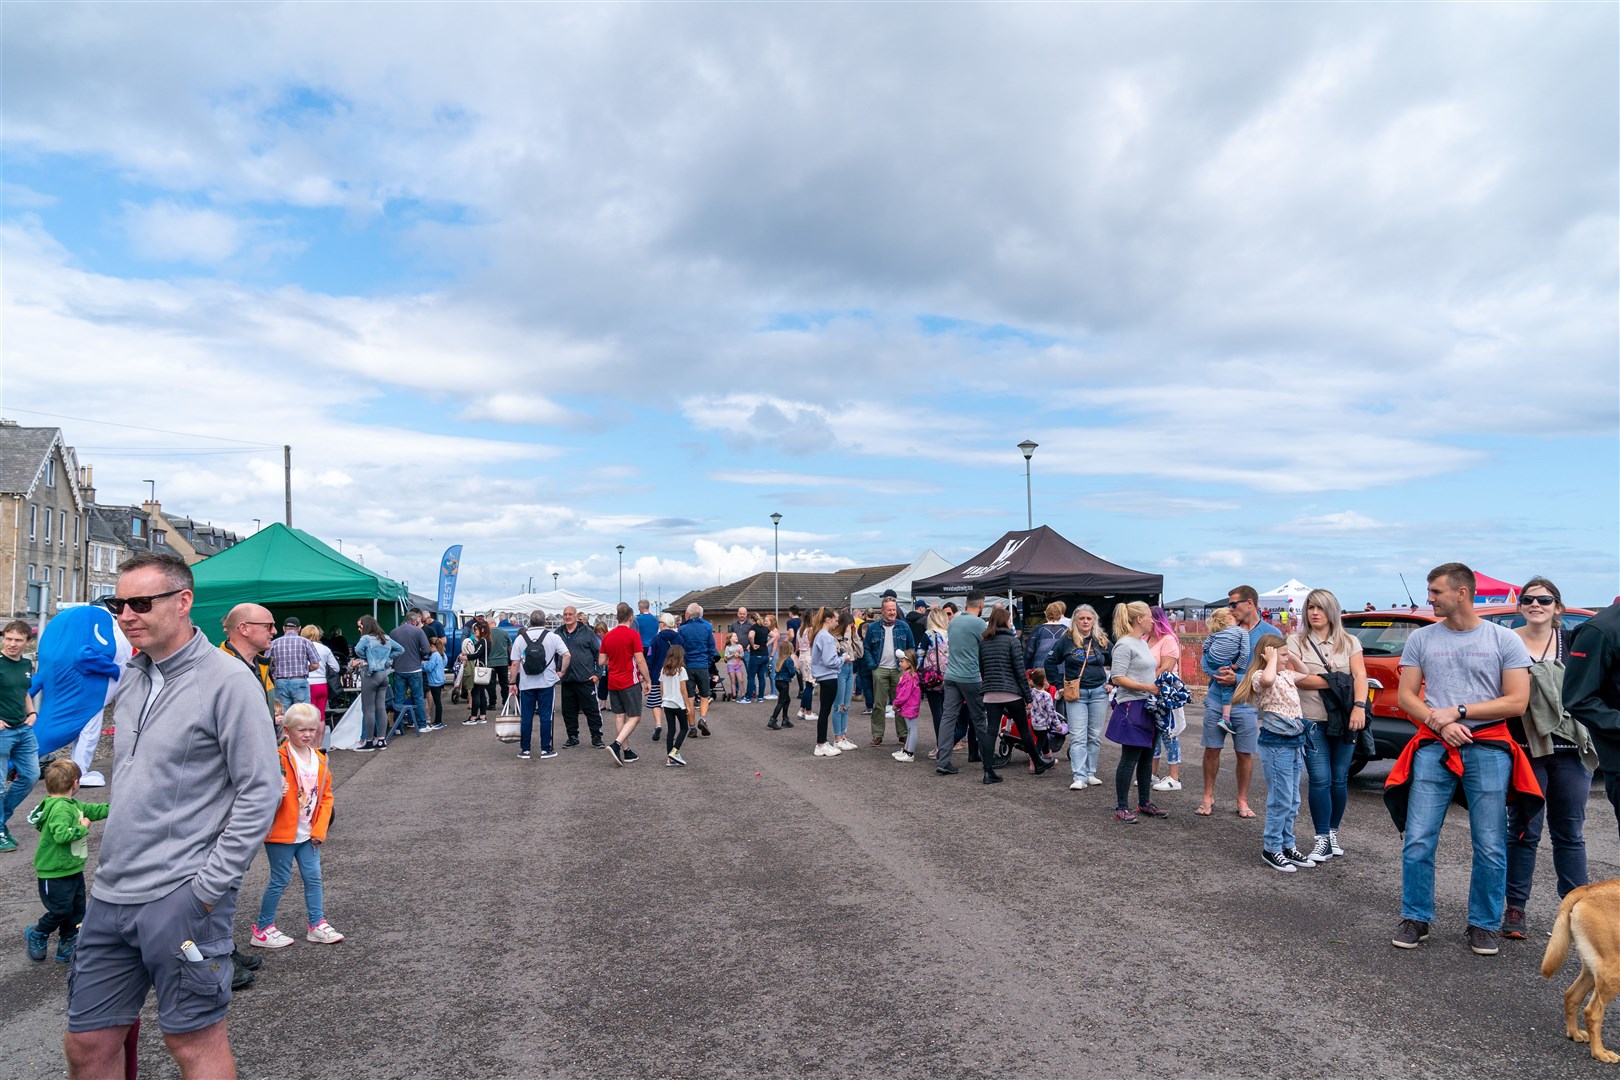 Lossiemouth is set to kick off Seafest with a family fayre this Saturday, July 1.